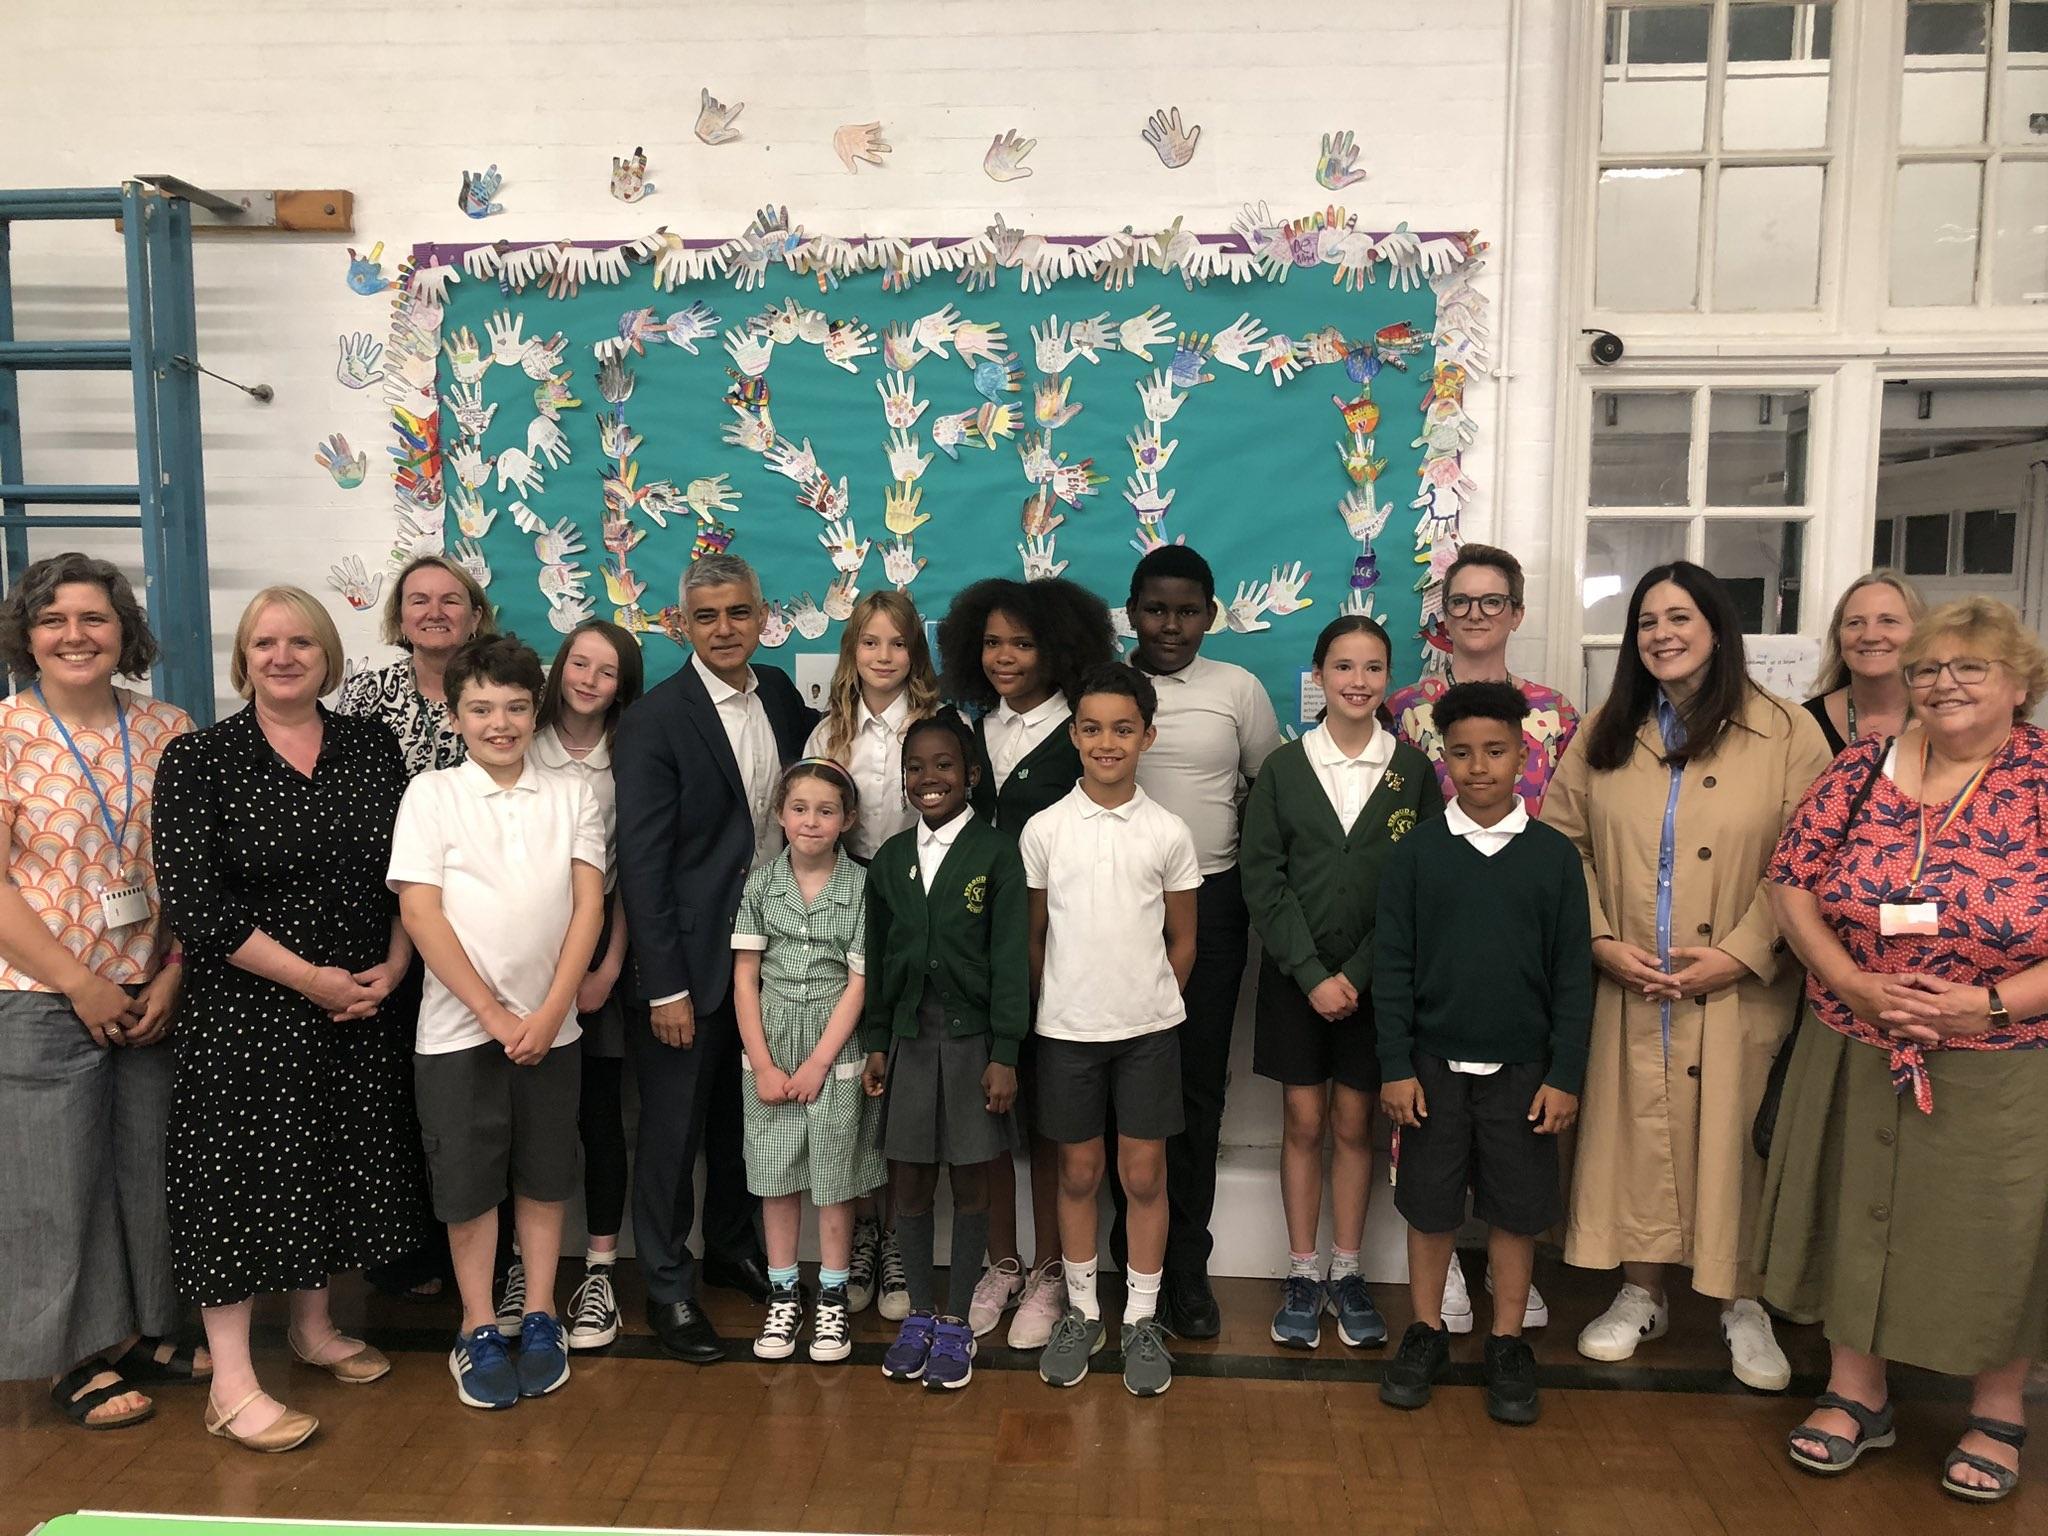 The pic is of the Mayor of London Sadiq Khan & Deputy Mayor Joanne McCartney alongside the Leader of Haringey Council, Cllr Peray Ahmet, our Cabinet Member for Children, Schools & Families, Cllr Zena Brabazon, & pupils & staff at Stroud Green Primary.